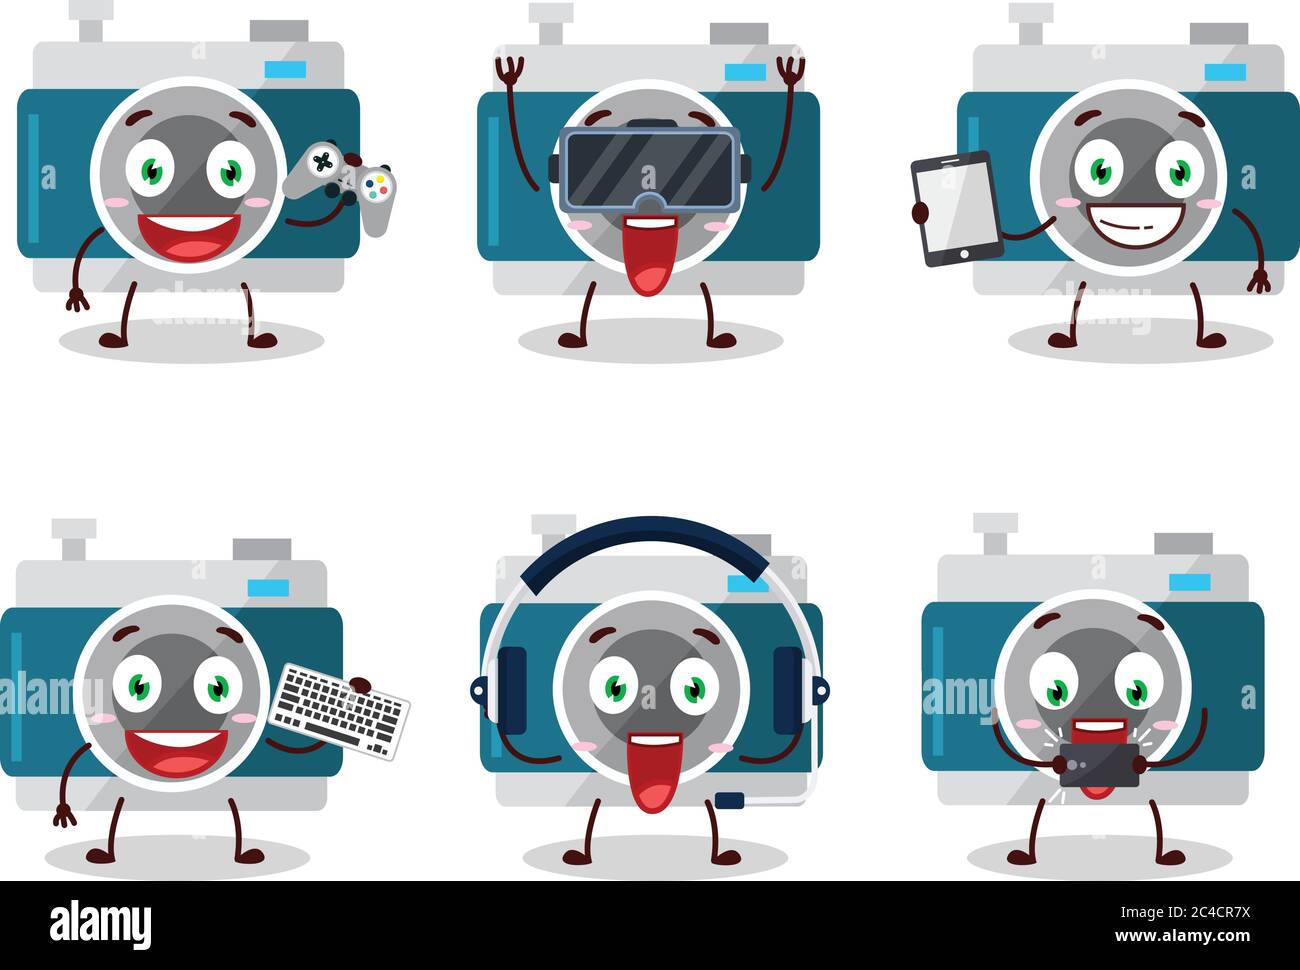 camera pocket cartoon character are playing games with various cute emoticons Stock Vector